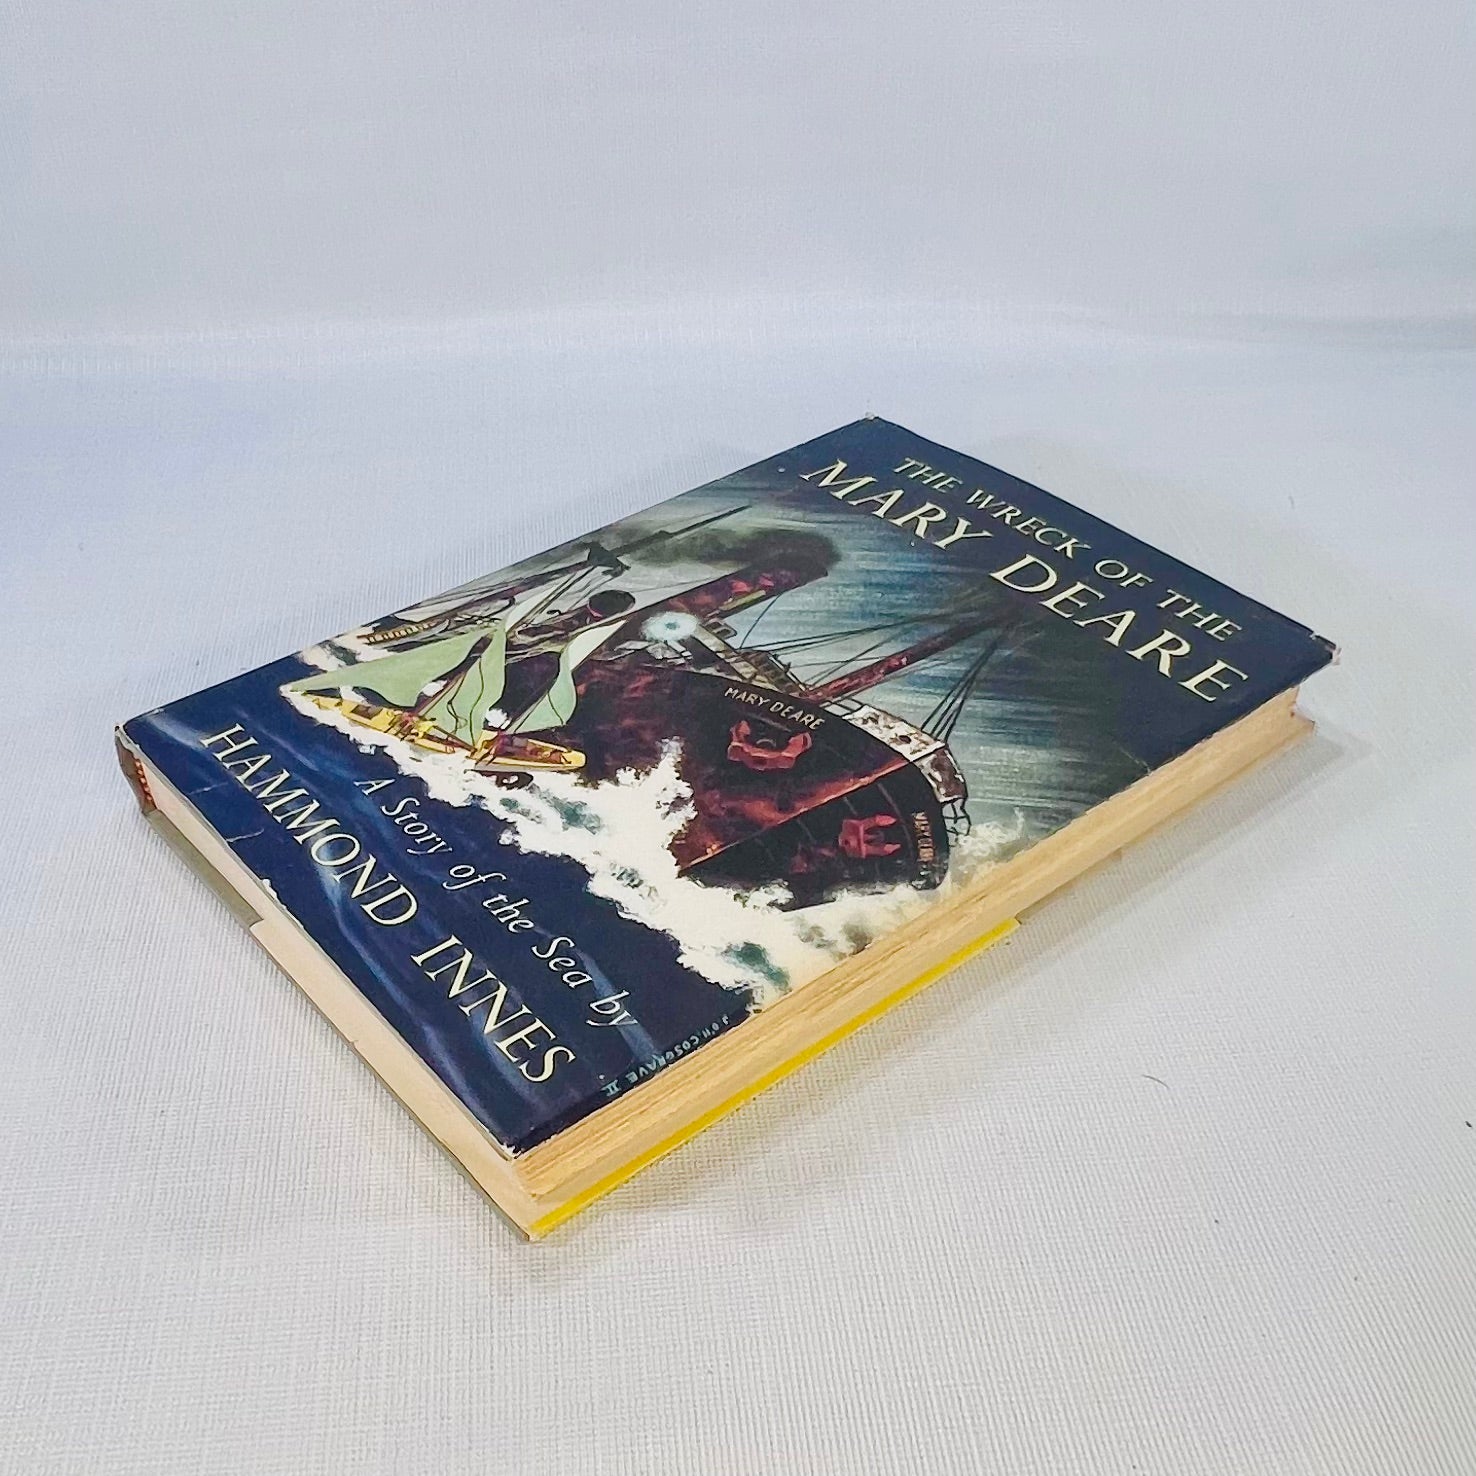 The Wreck of the  Mary Deare A Story of the Hammond Innes by  Alfred A Knopf 1956